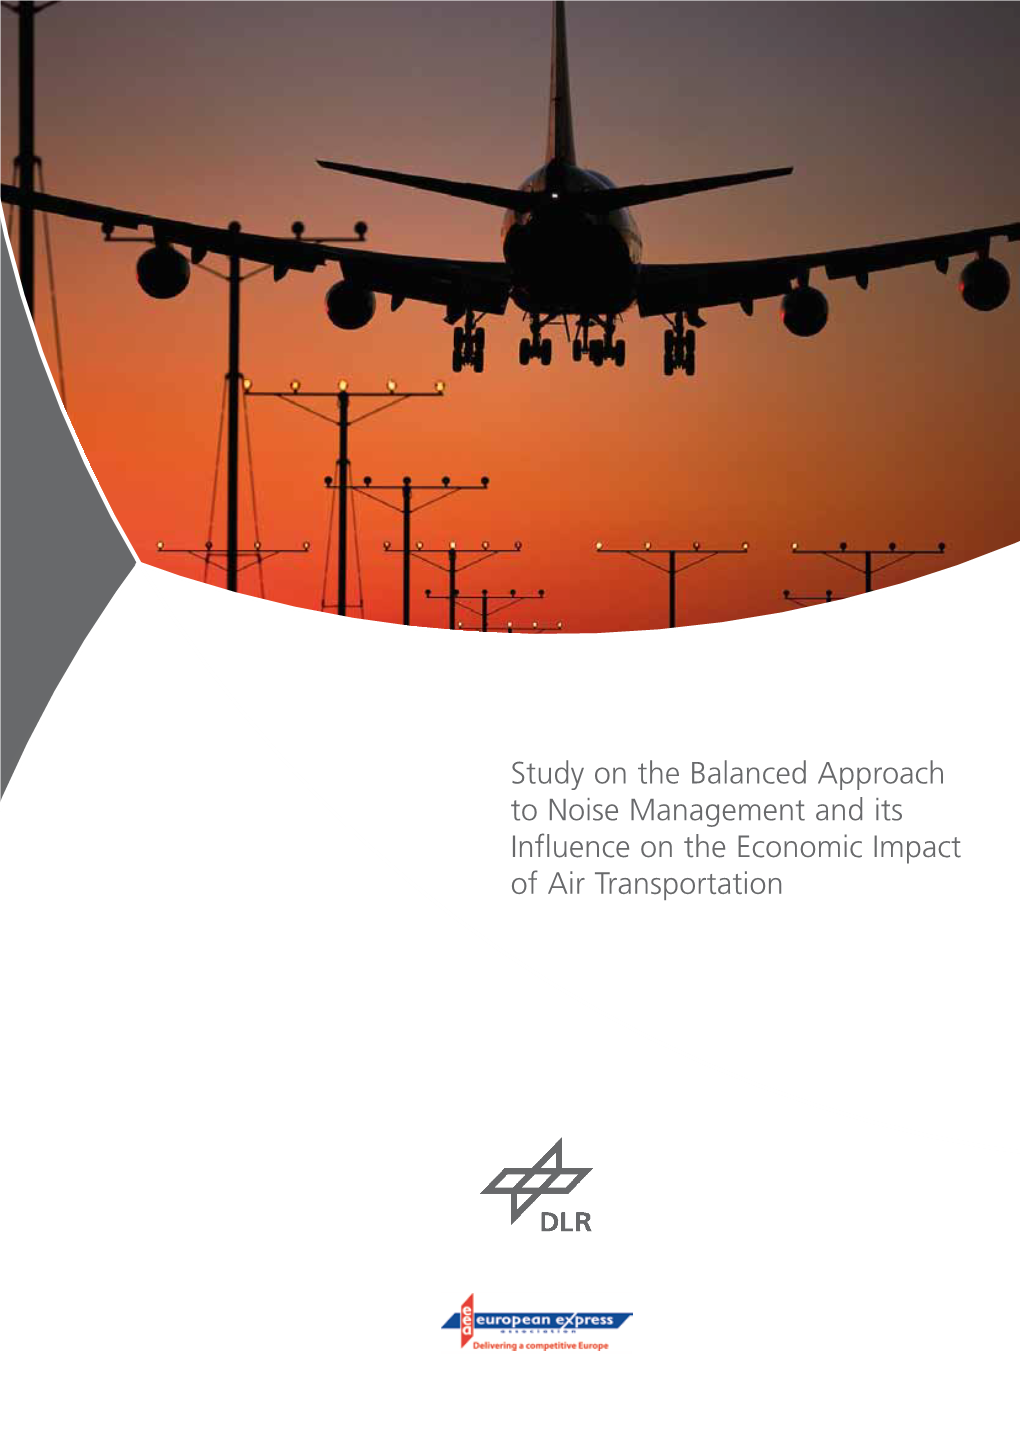 Study on the Balanced Approach to Noise Management and Its Influence on the Economic Impact of Air Transportation